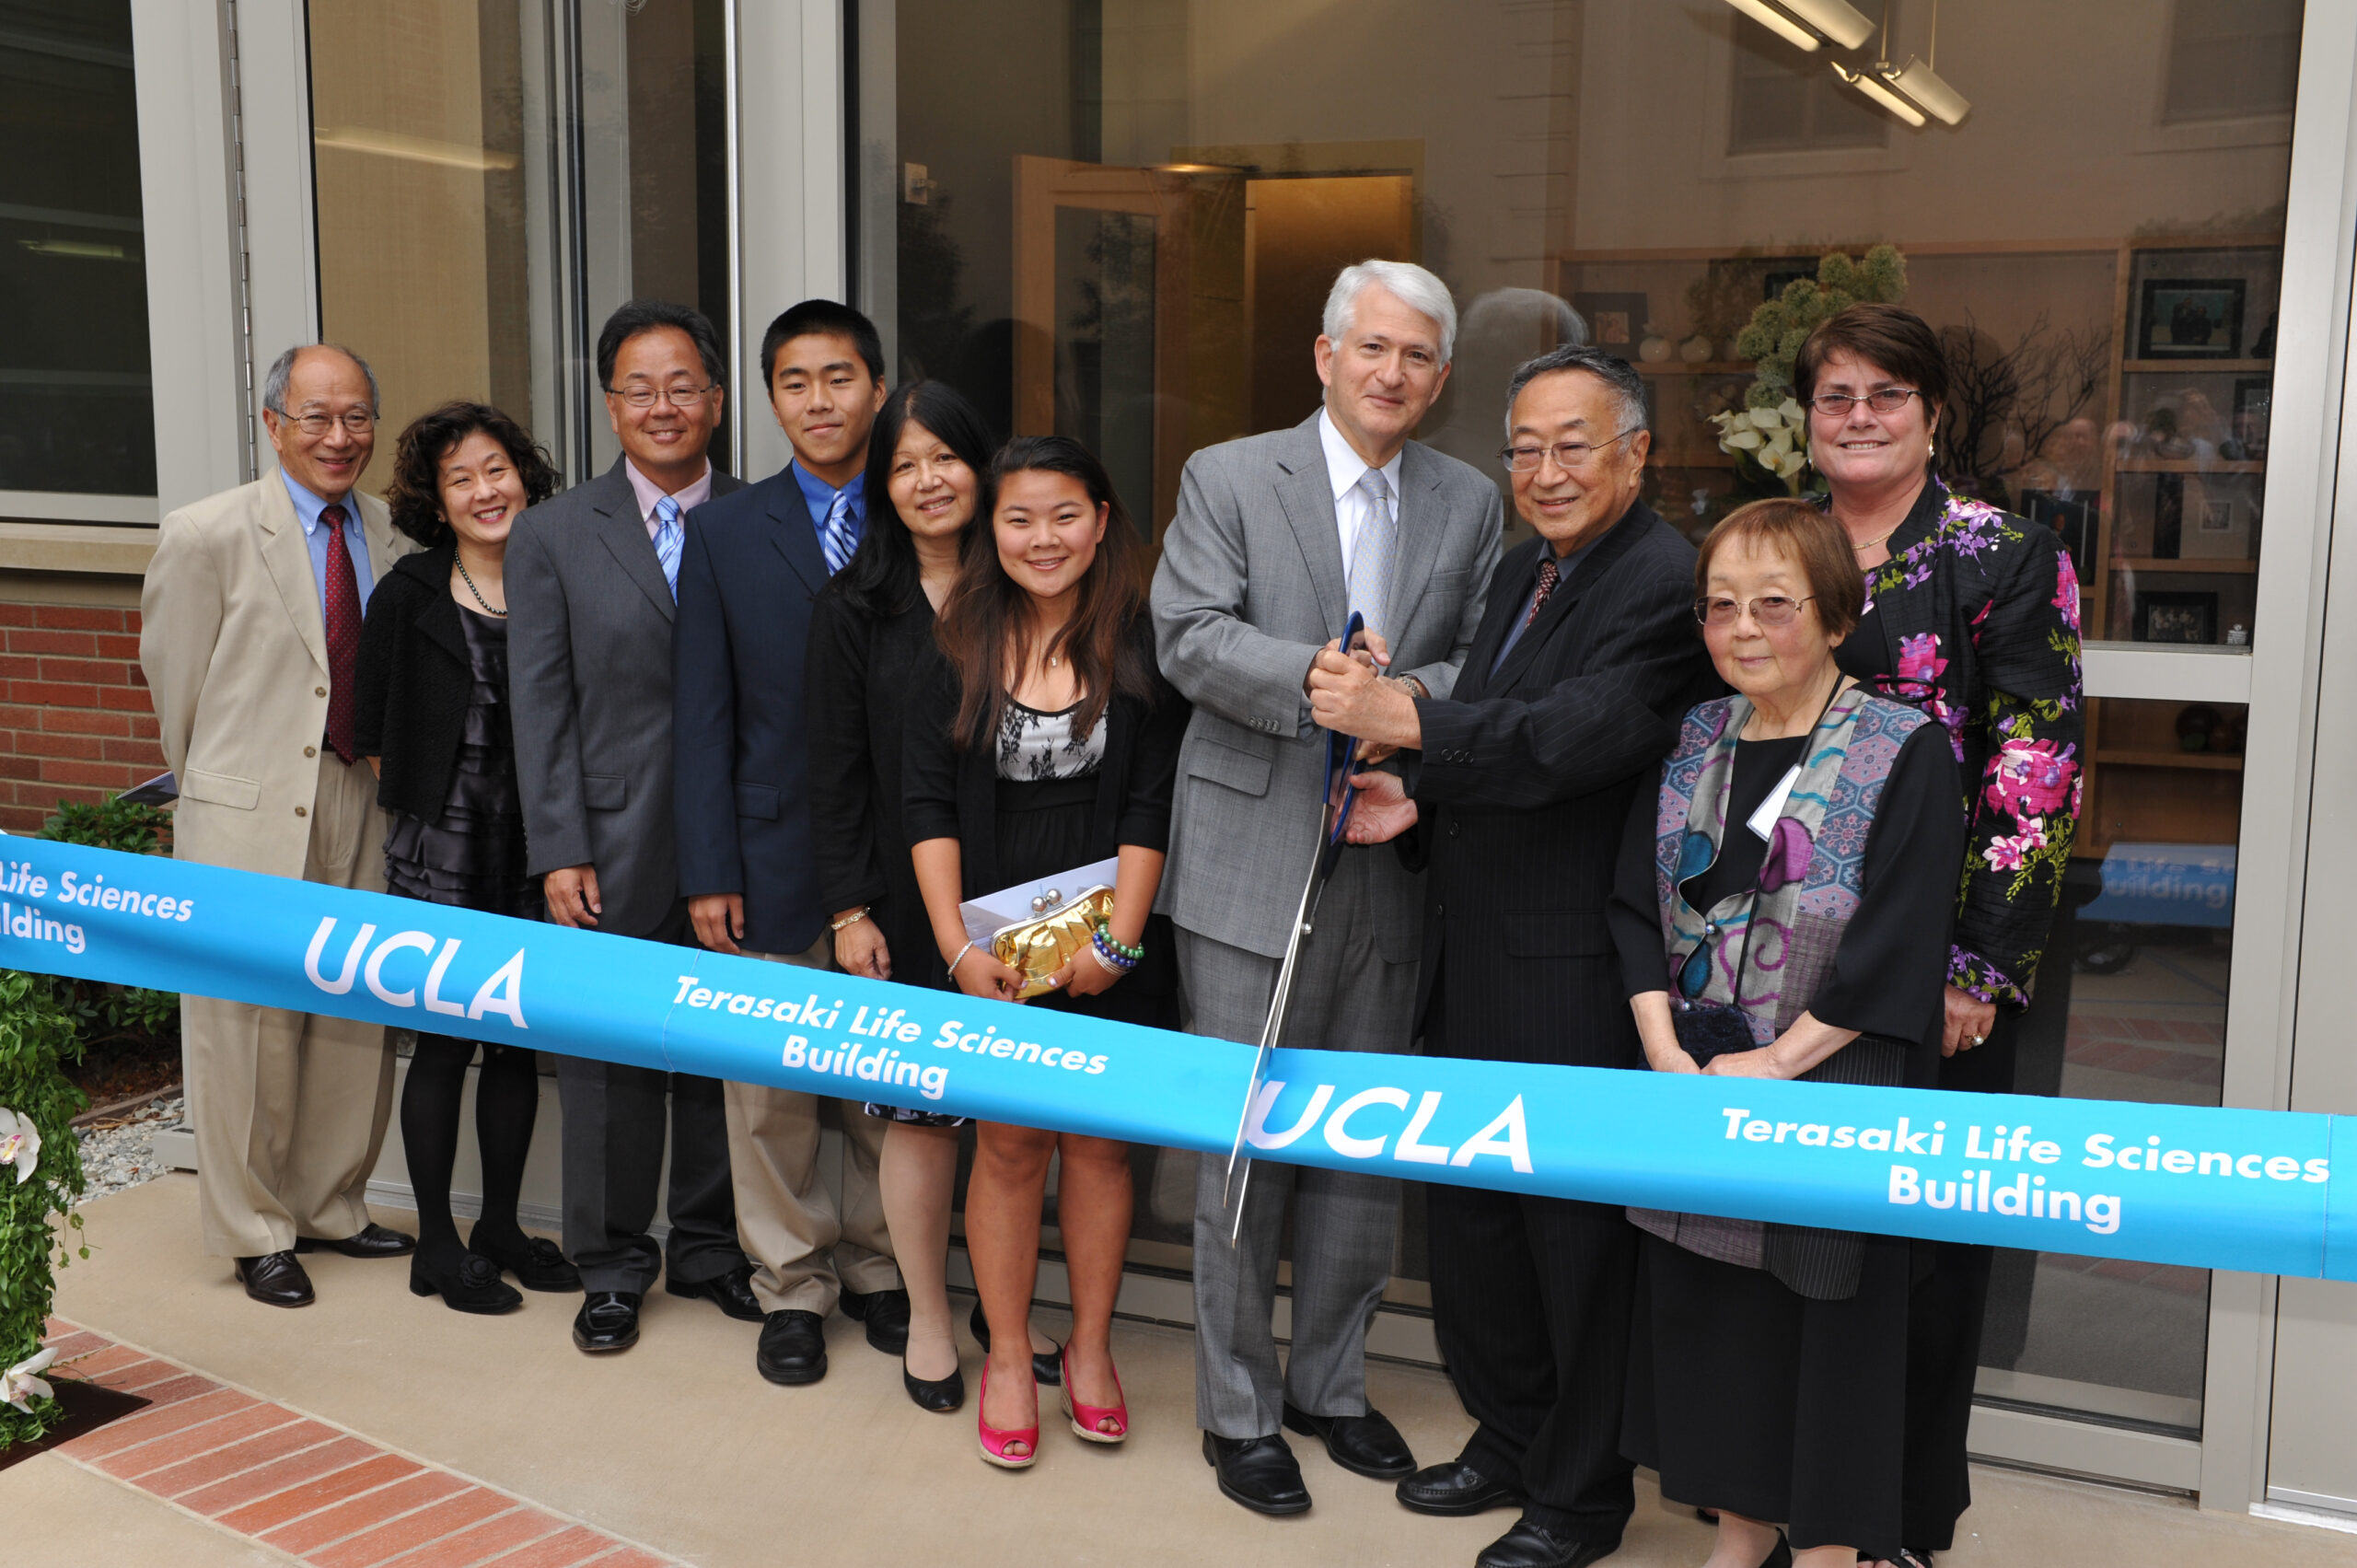 Chancellor Block stands with Paul Tarasaki and others, while cutting ribbon, at the opening of the Terasaki Life Sciences Building